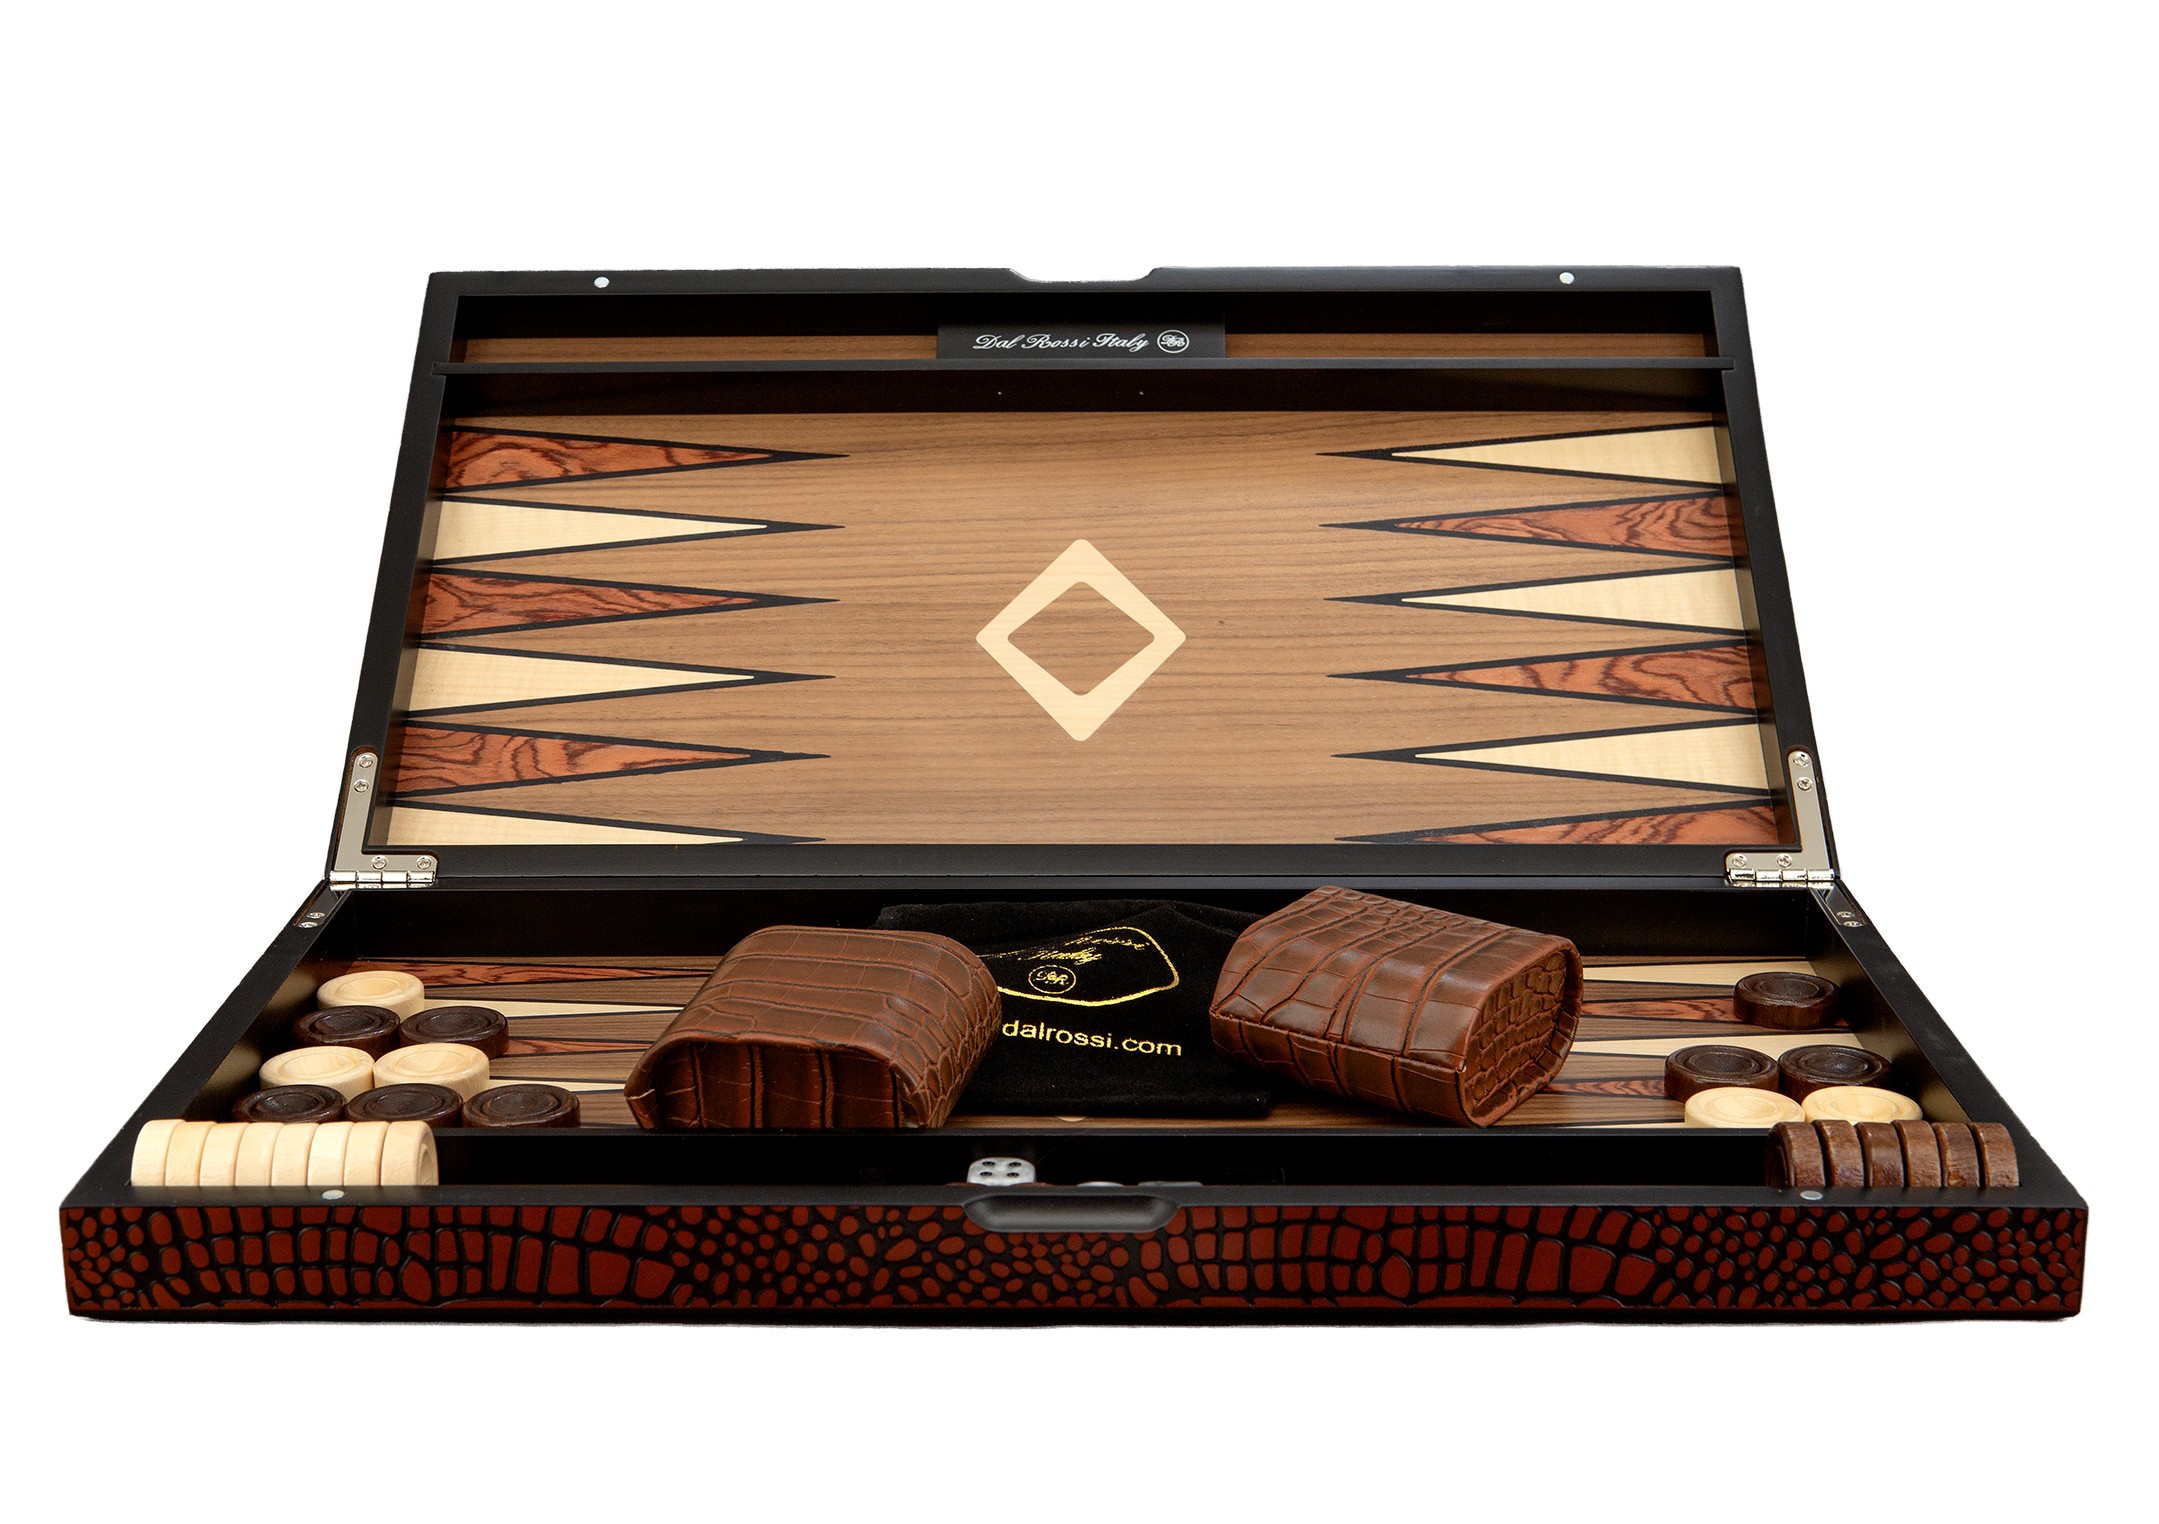 Dal Rossi Wooden Crocodile Engraved Design Backgammon Light Tan Colour Top and Inlaid Wooden Playing Area 18" 